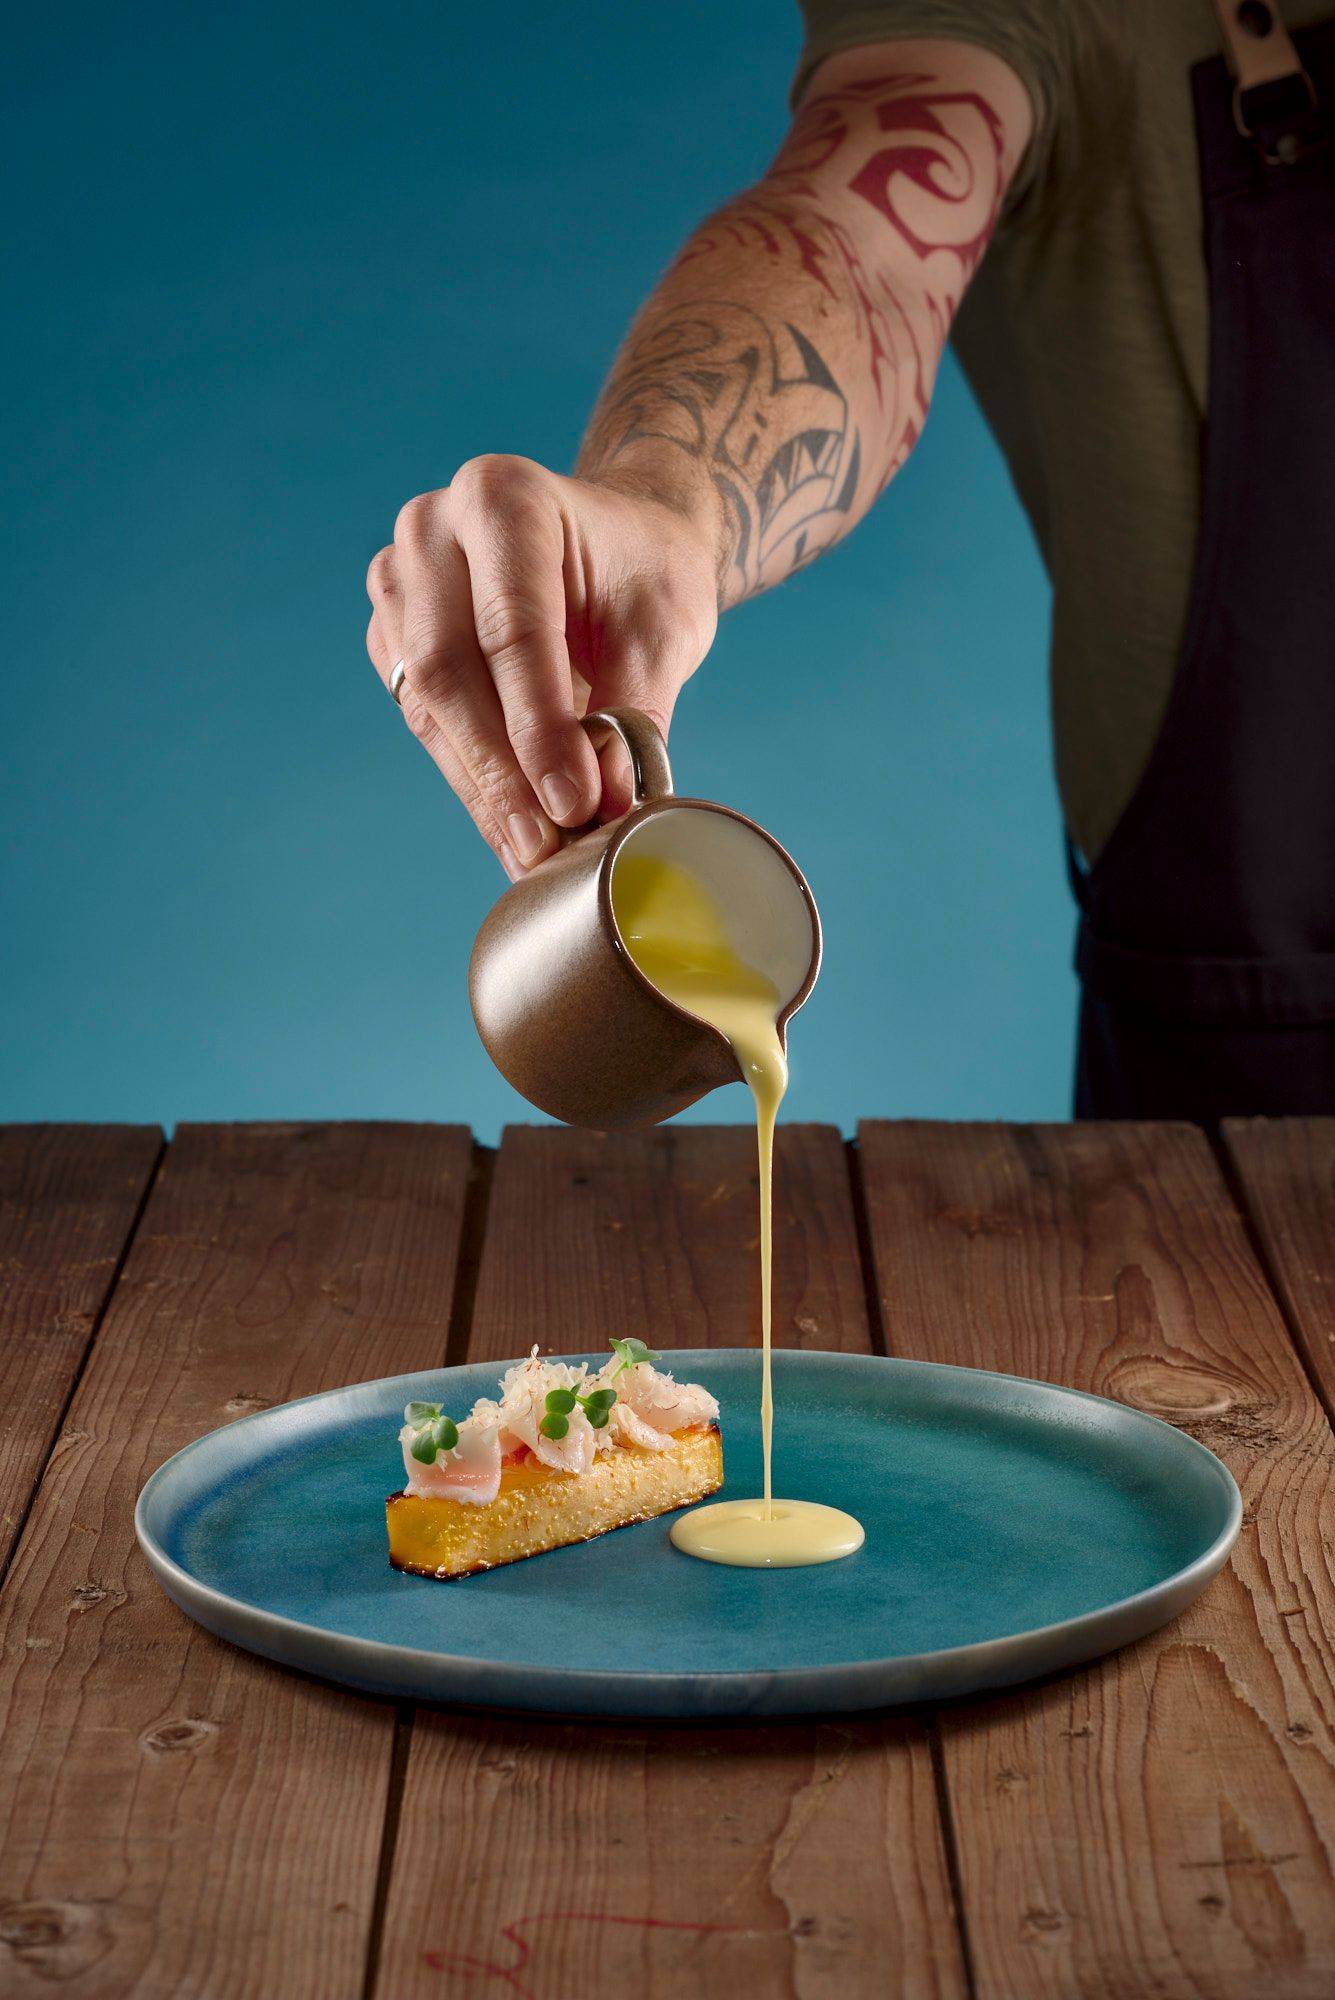 rutabaga with lardo bacon and beurre blanc of pickled gherkins on a blue plate with wooden table and blue background